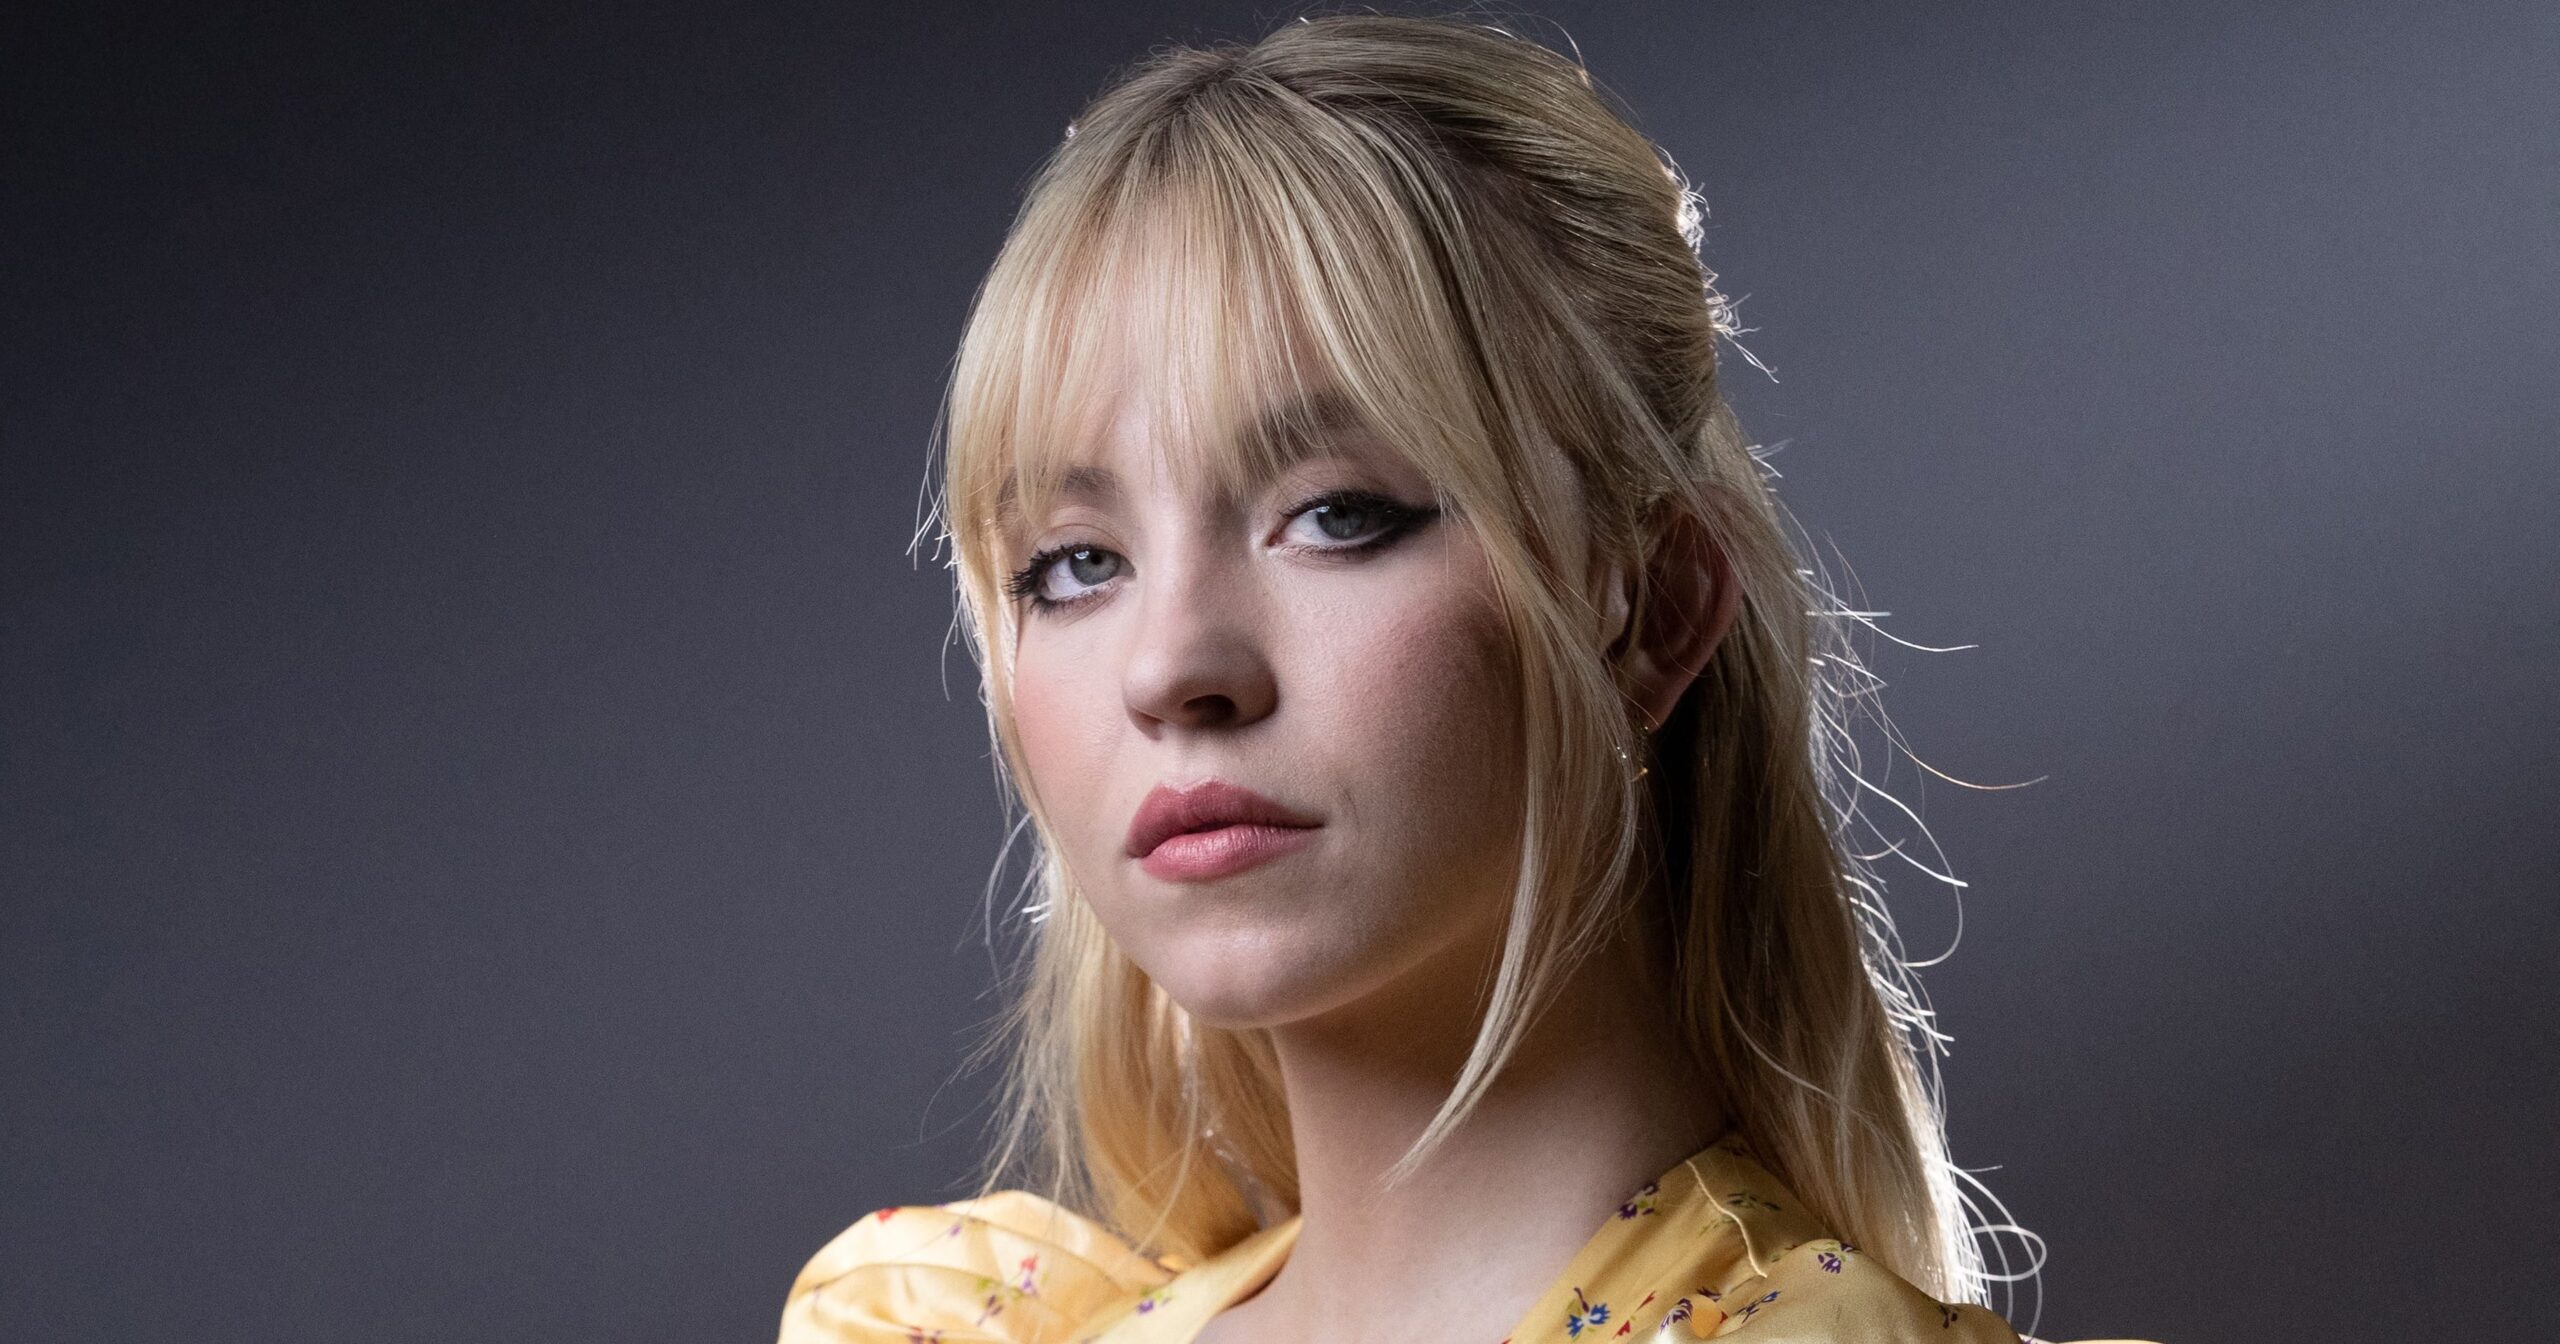 Who Is Sydney Sweeney Courting?